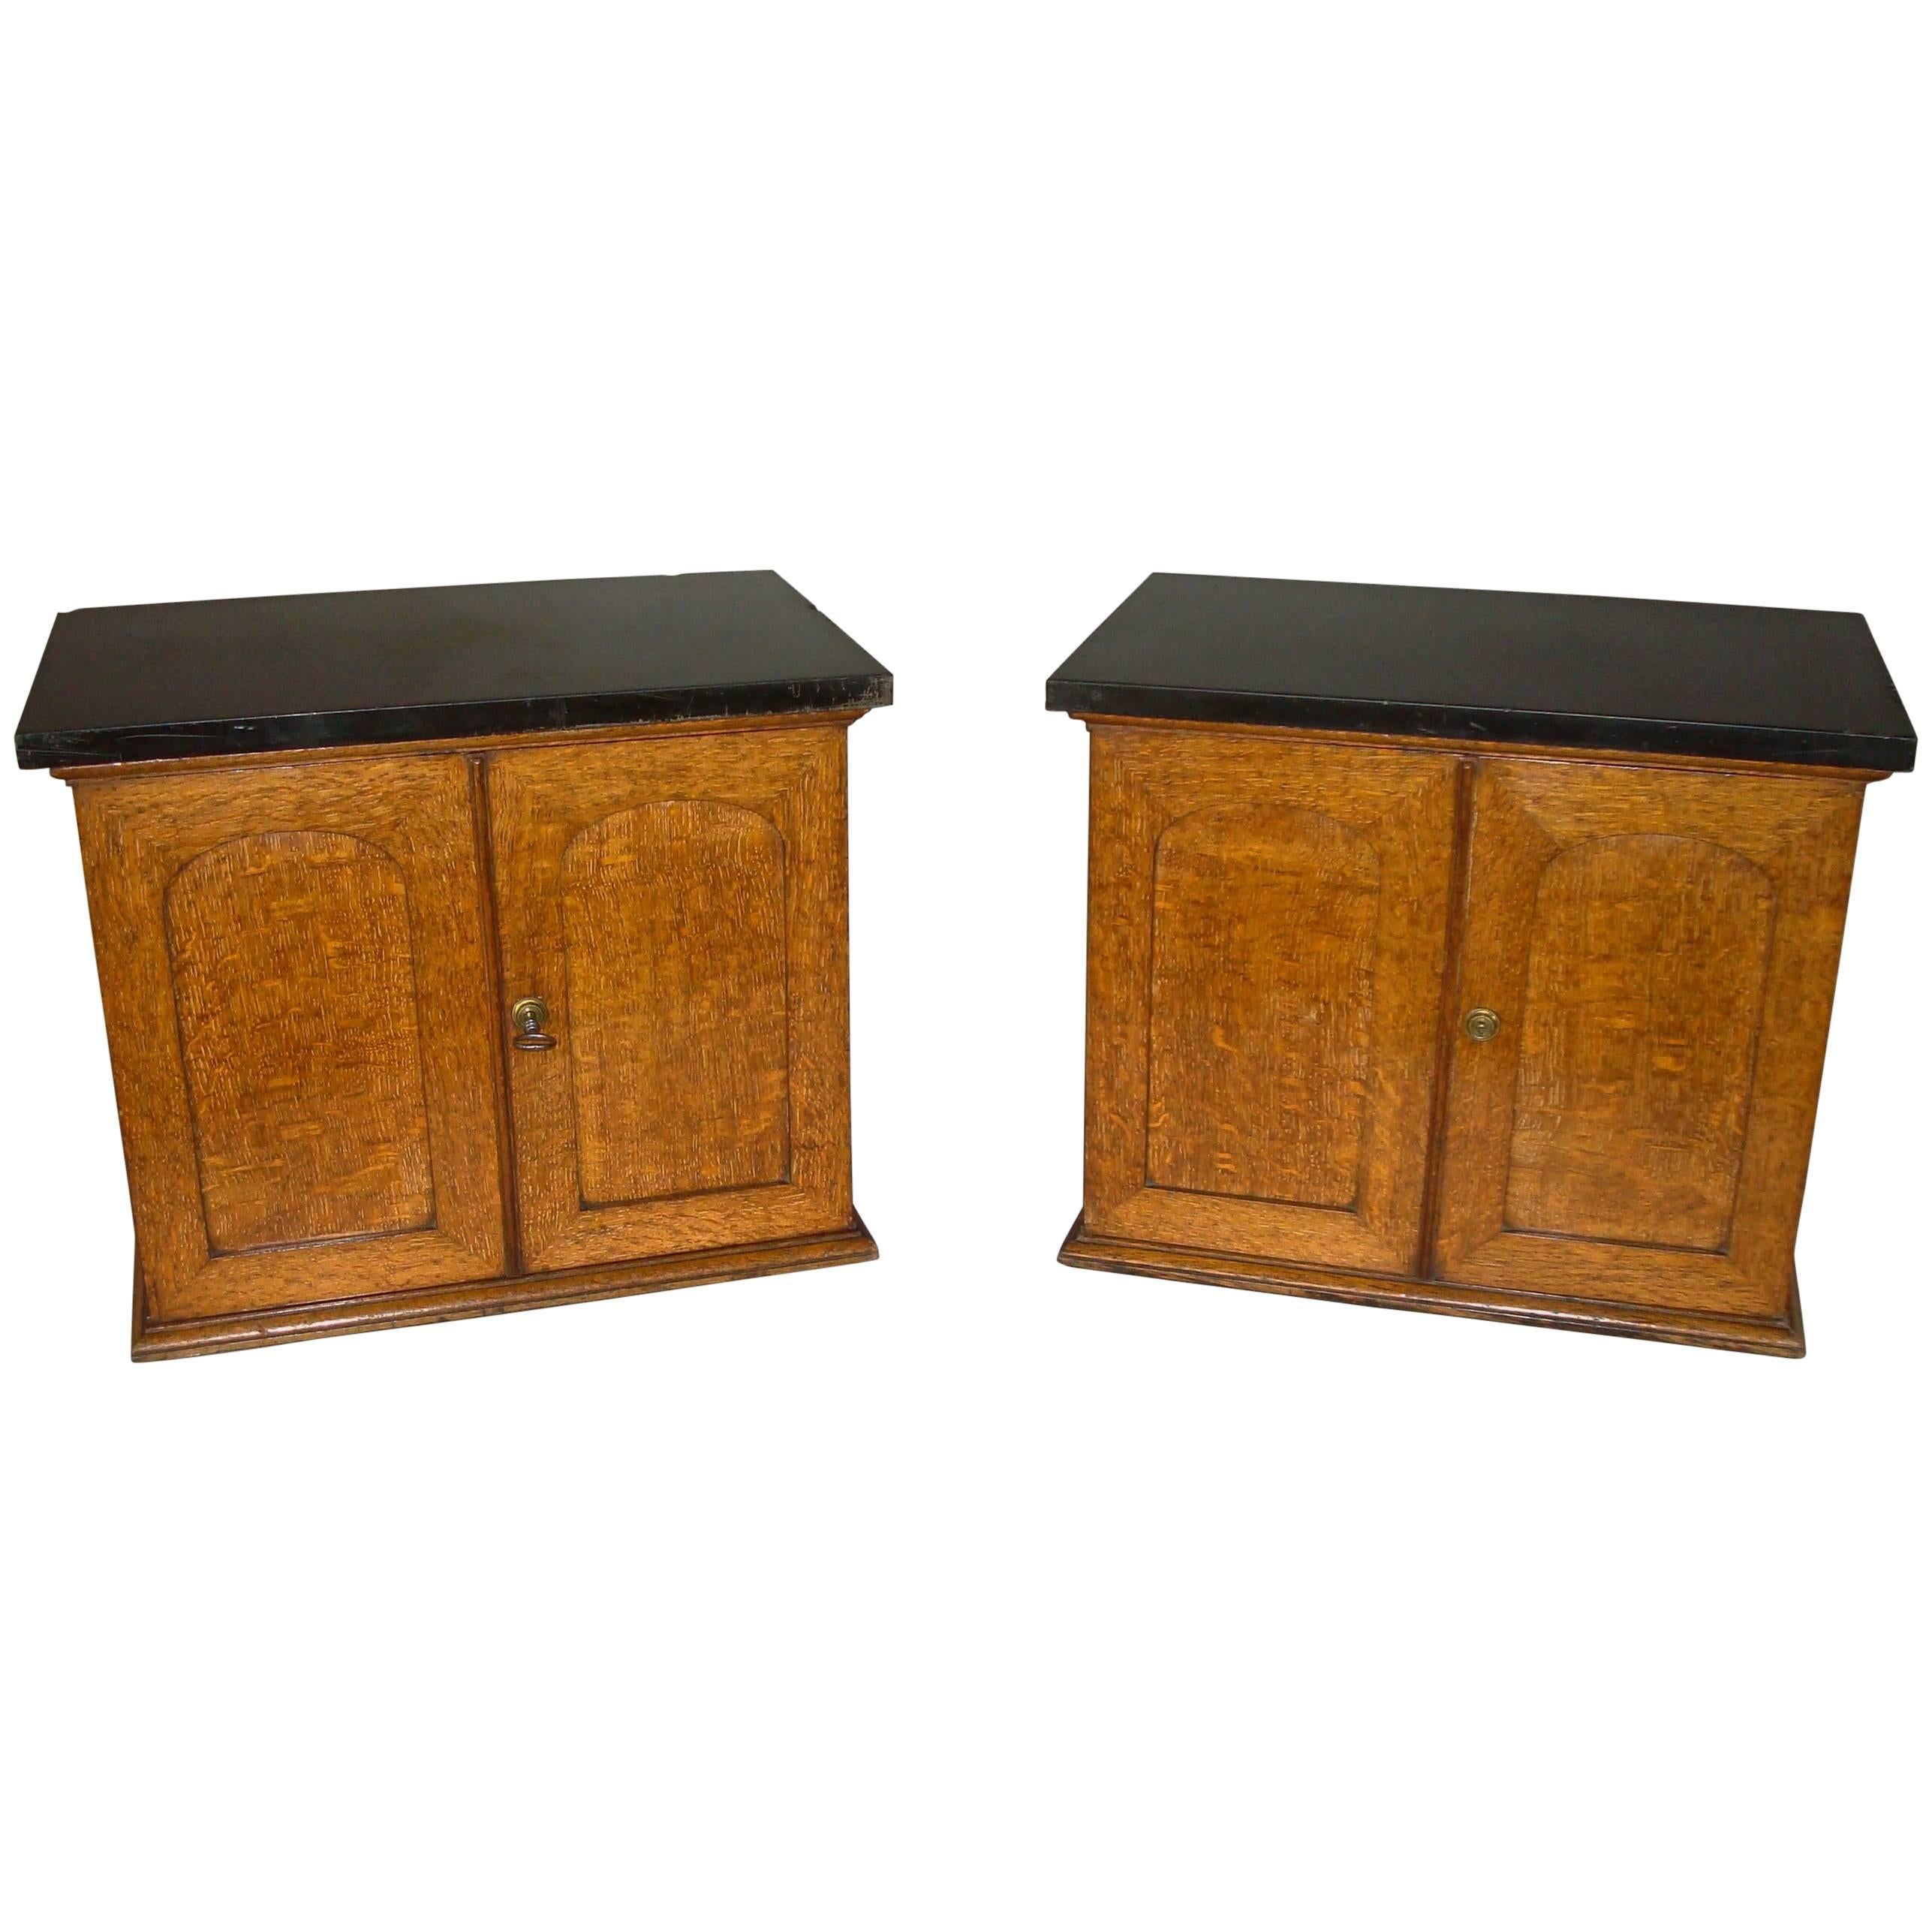 19th Century Pair of Golden Oak Table Cabinets For Sale